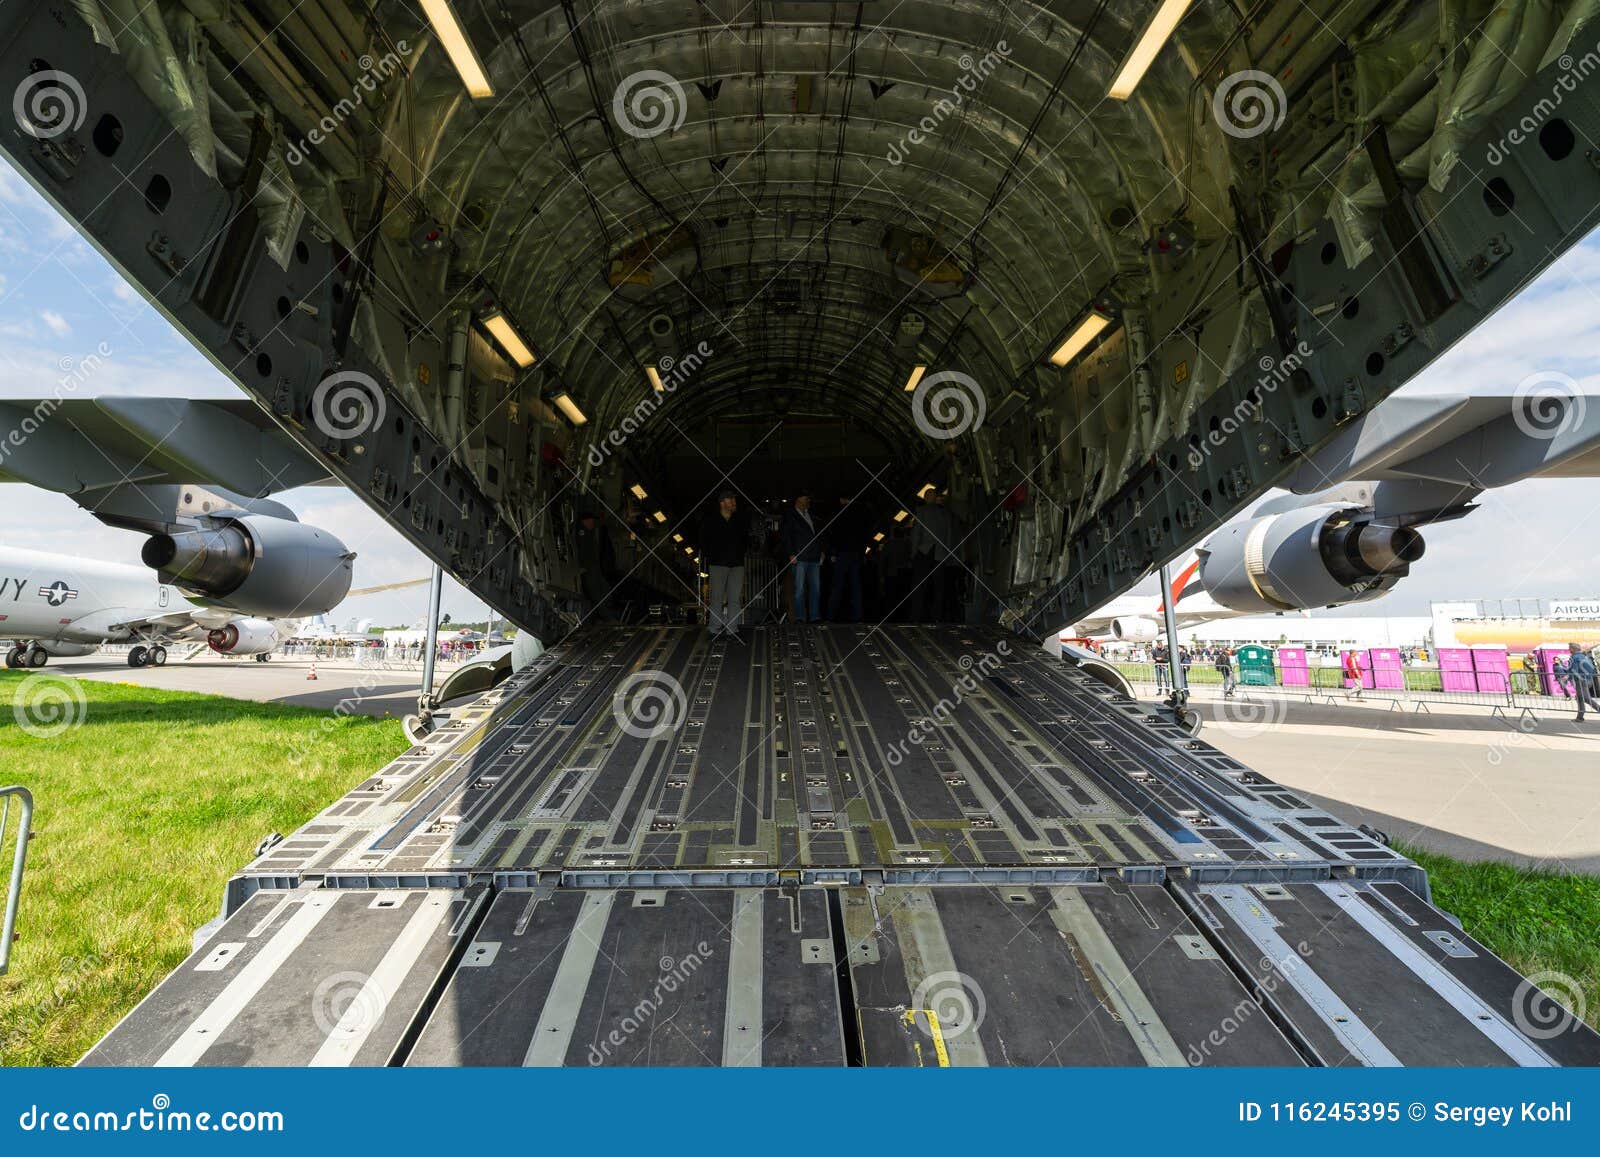 The Cargo Compartment Of The Strategic And Tactical